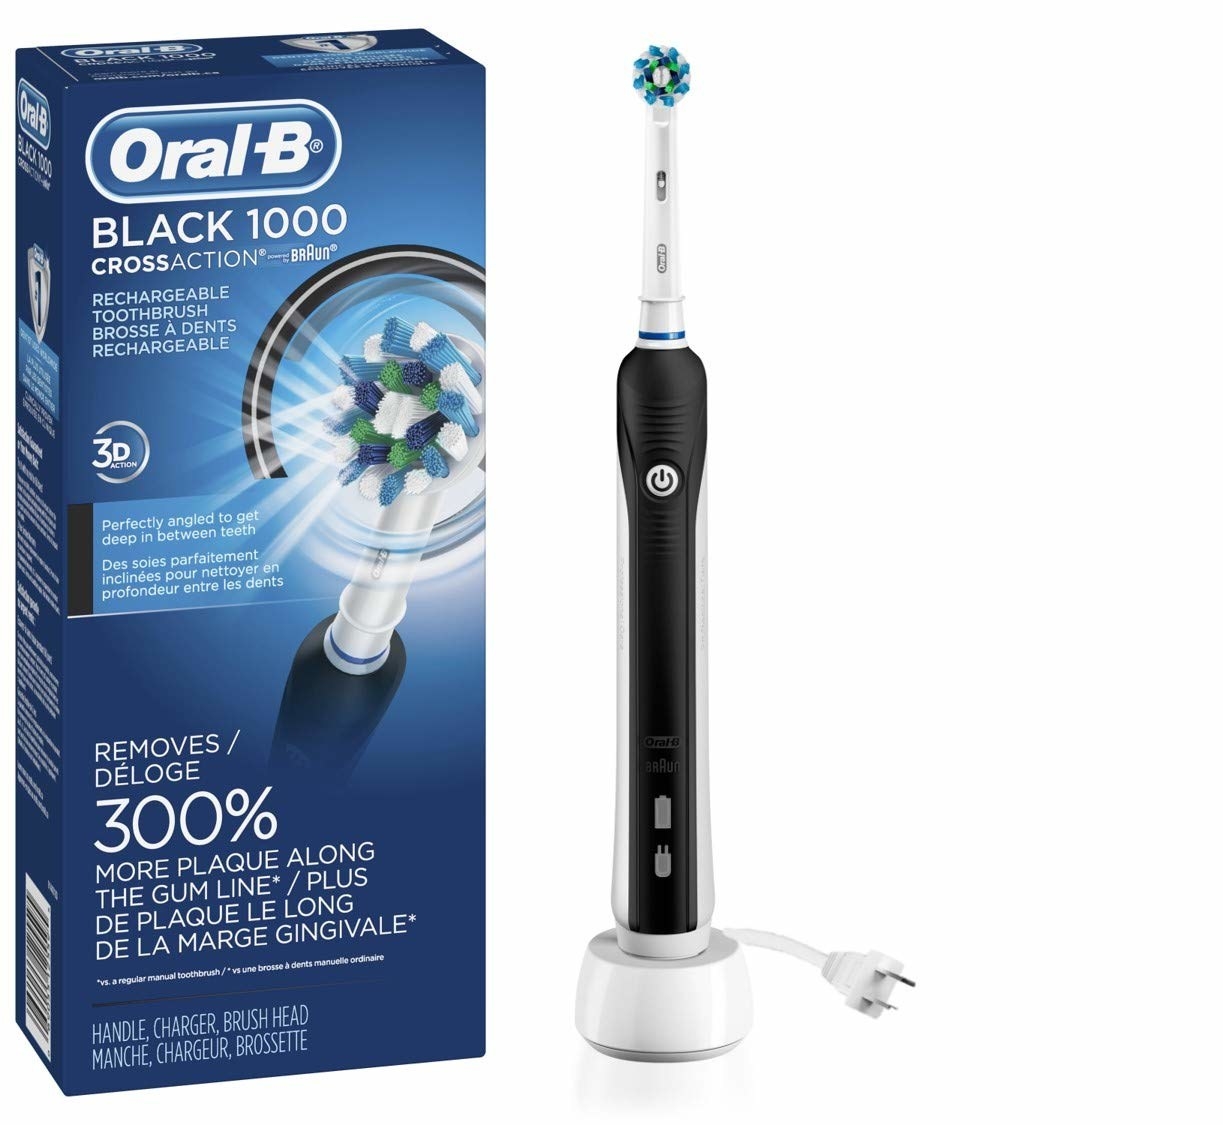 An electric toothbrush sitting on a small charging base